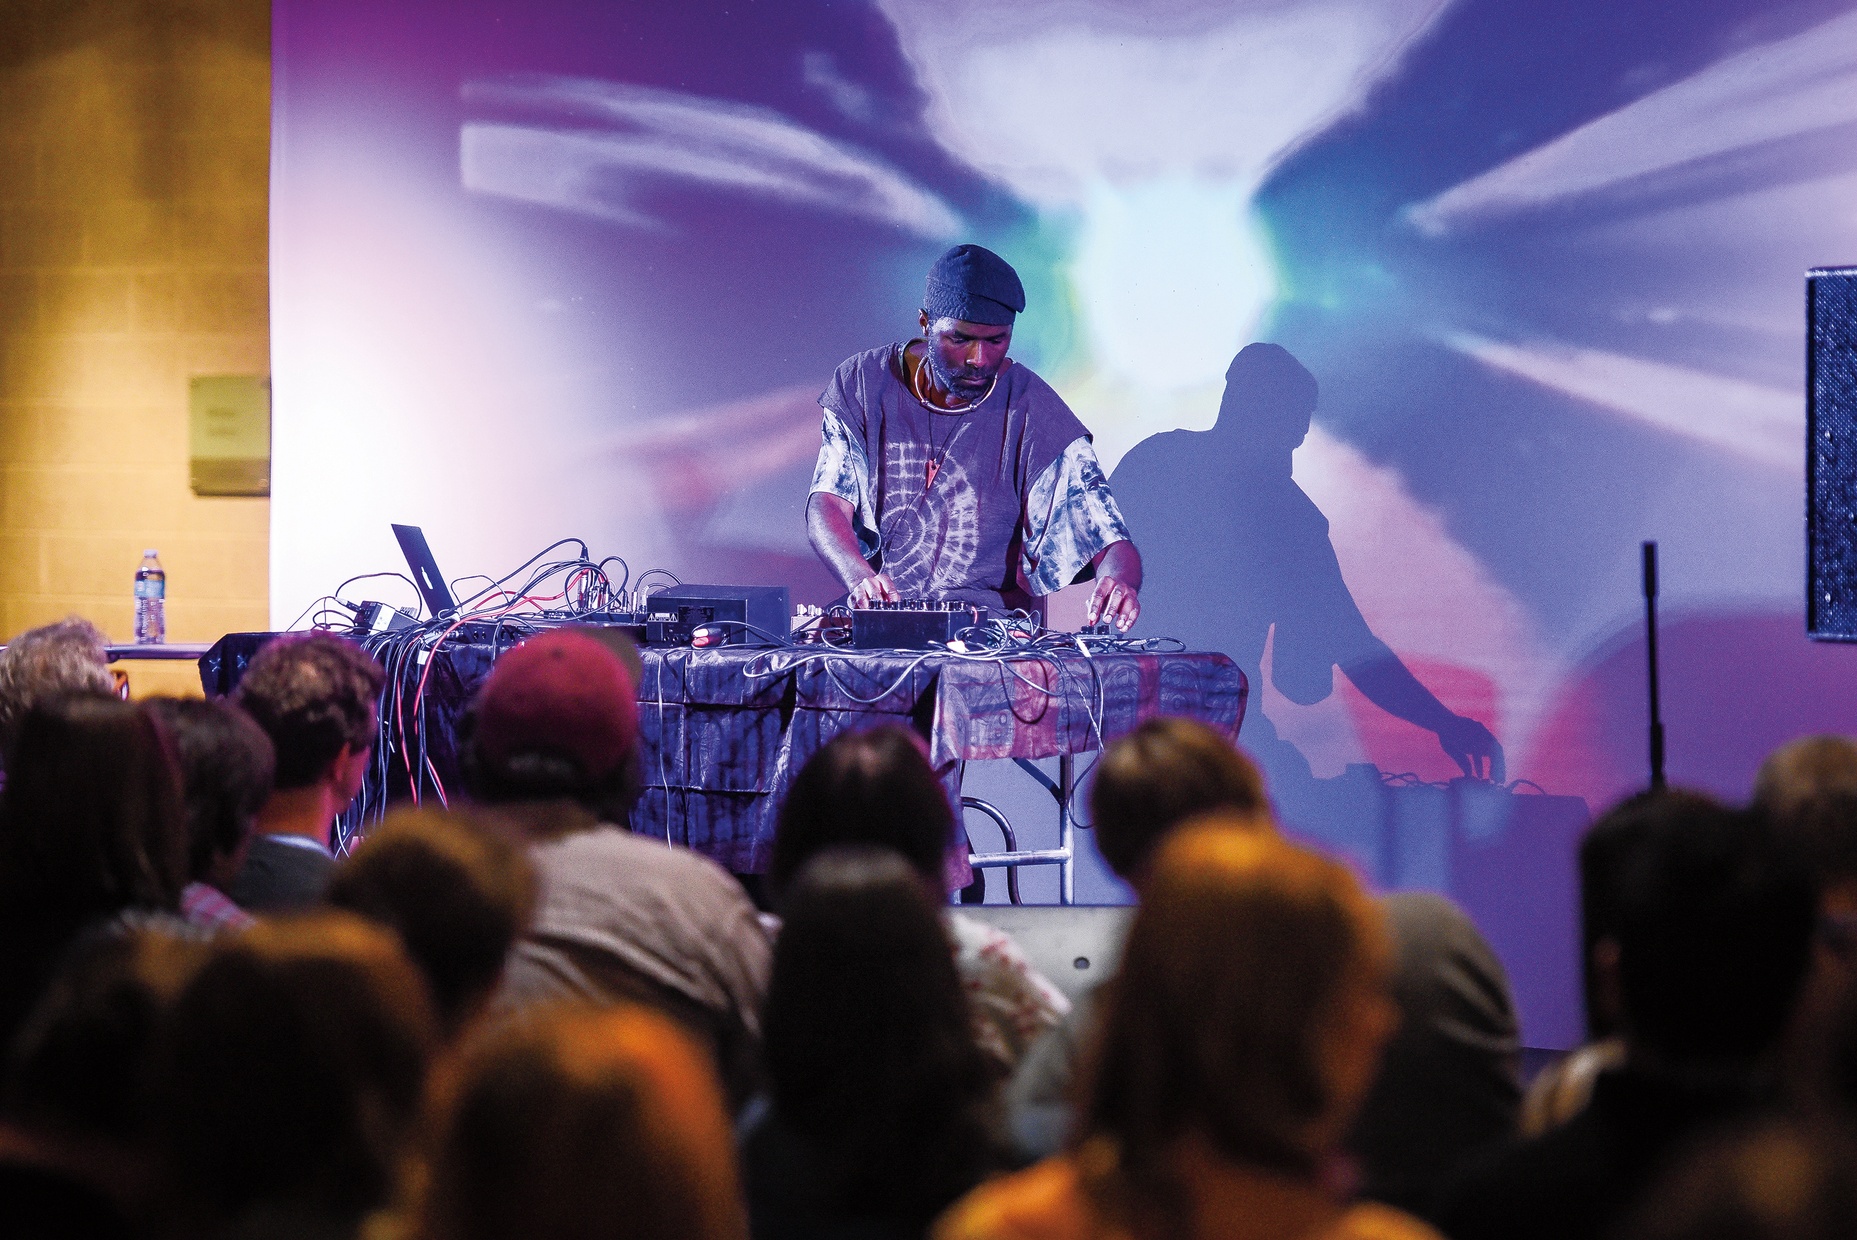 Photo of a man deejaying with purple and blue lights flashing around him.